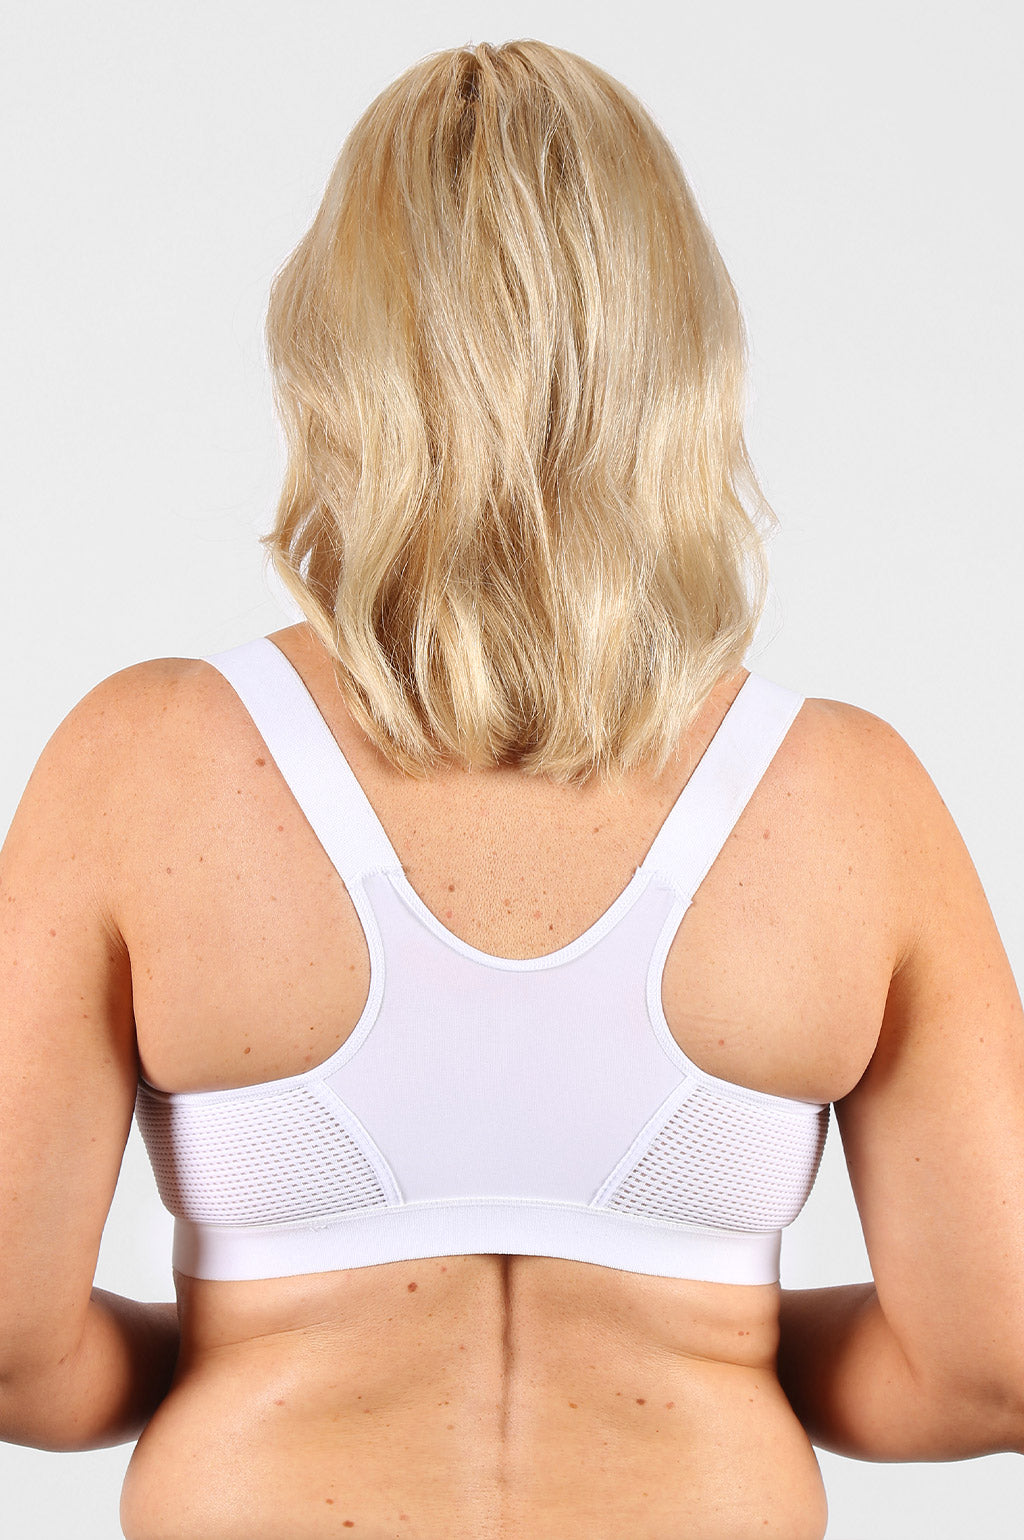 Post-Surgery Bras: Supporting Women's Health During Recover